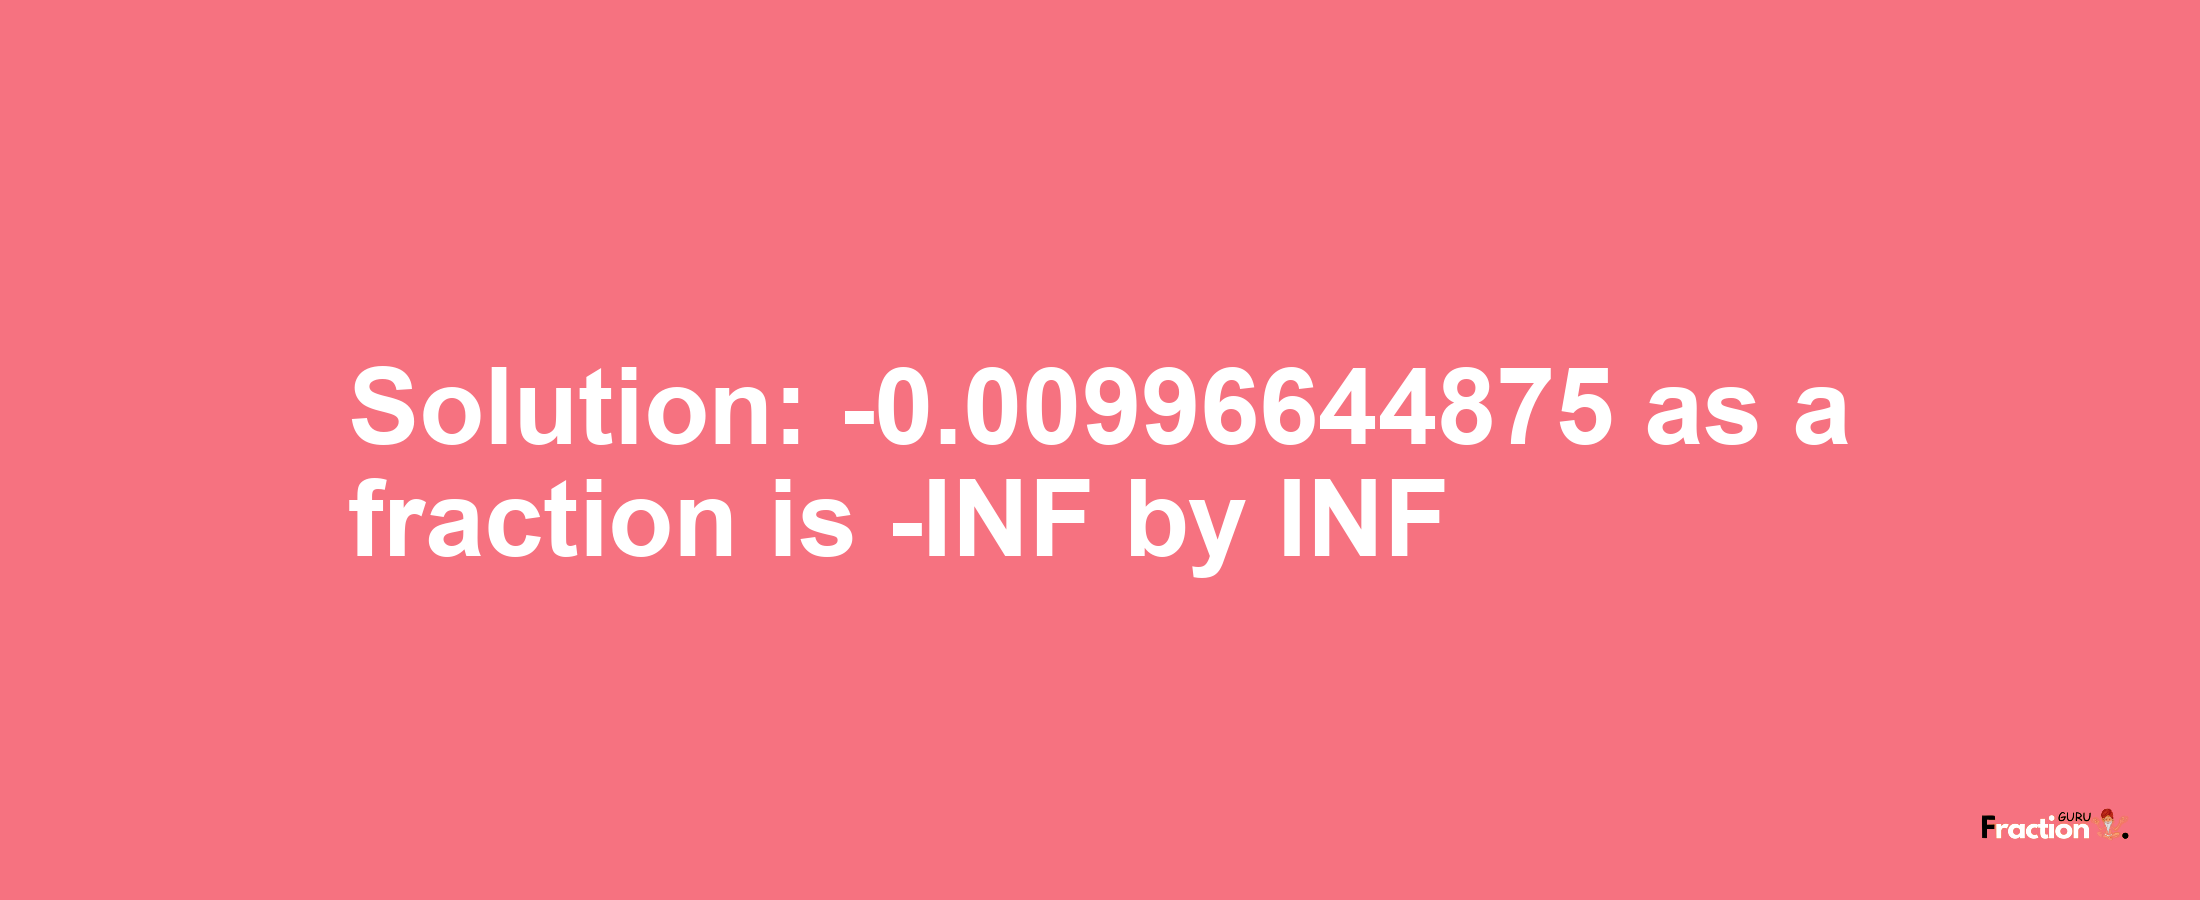 Solution:-0.00996644875 as a fraction is -INF/INF